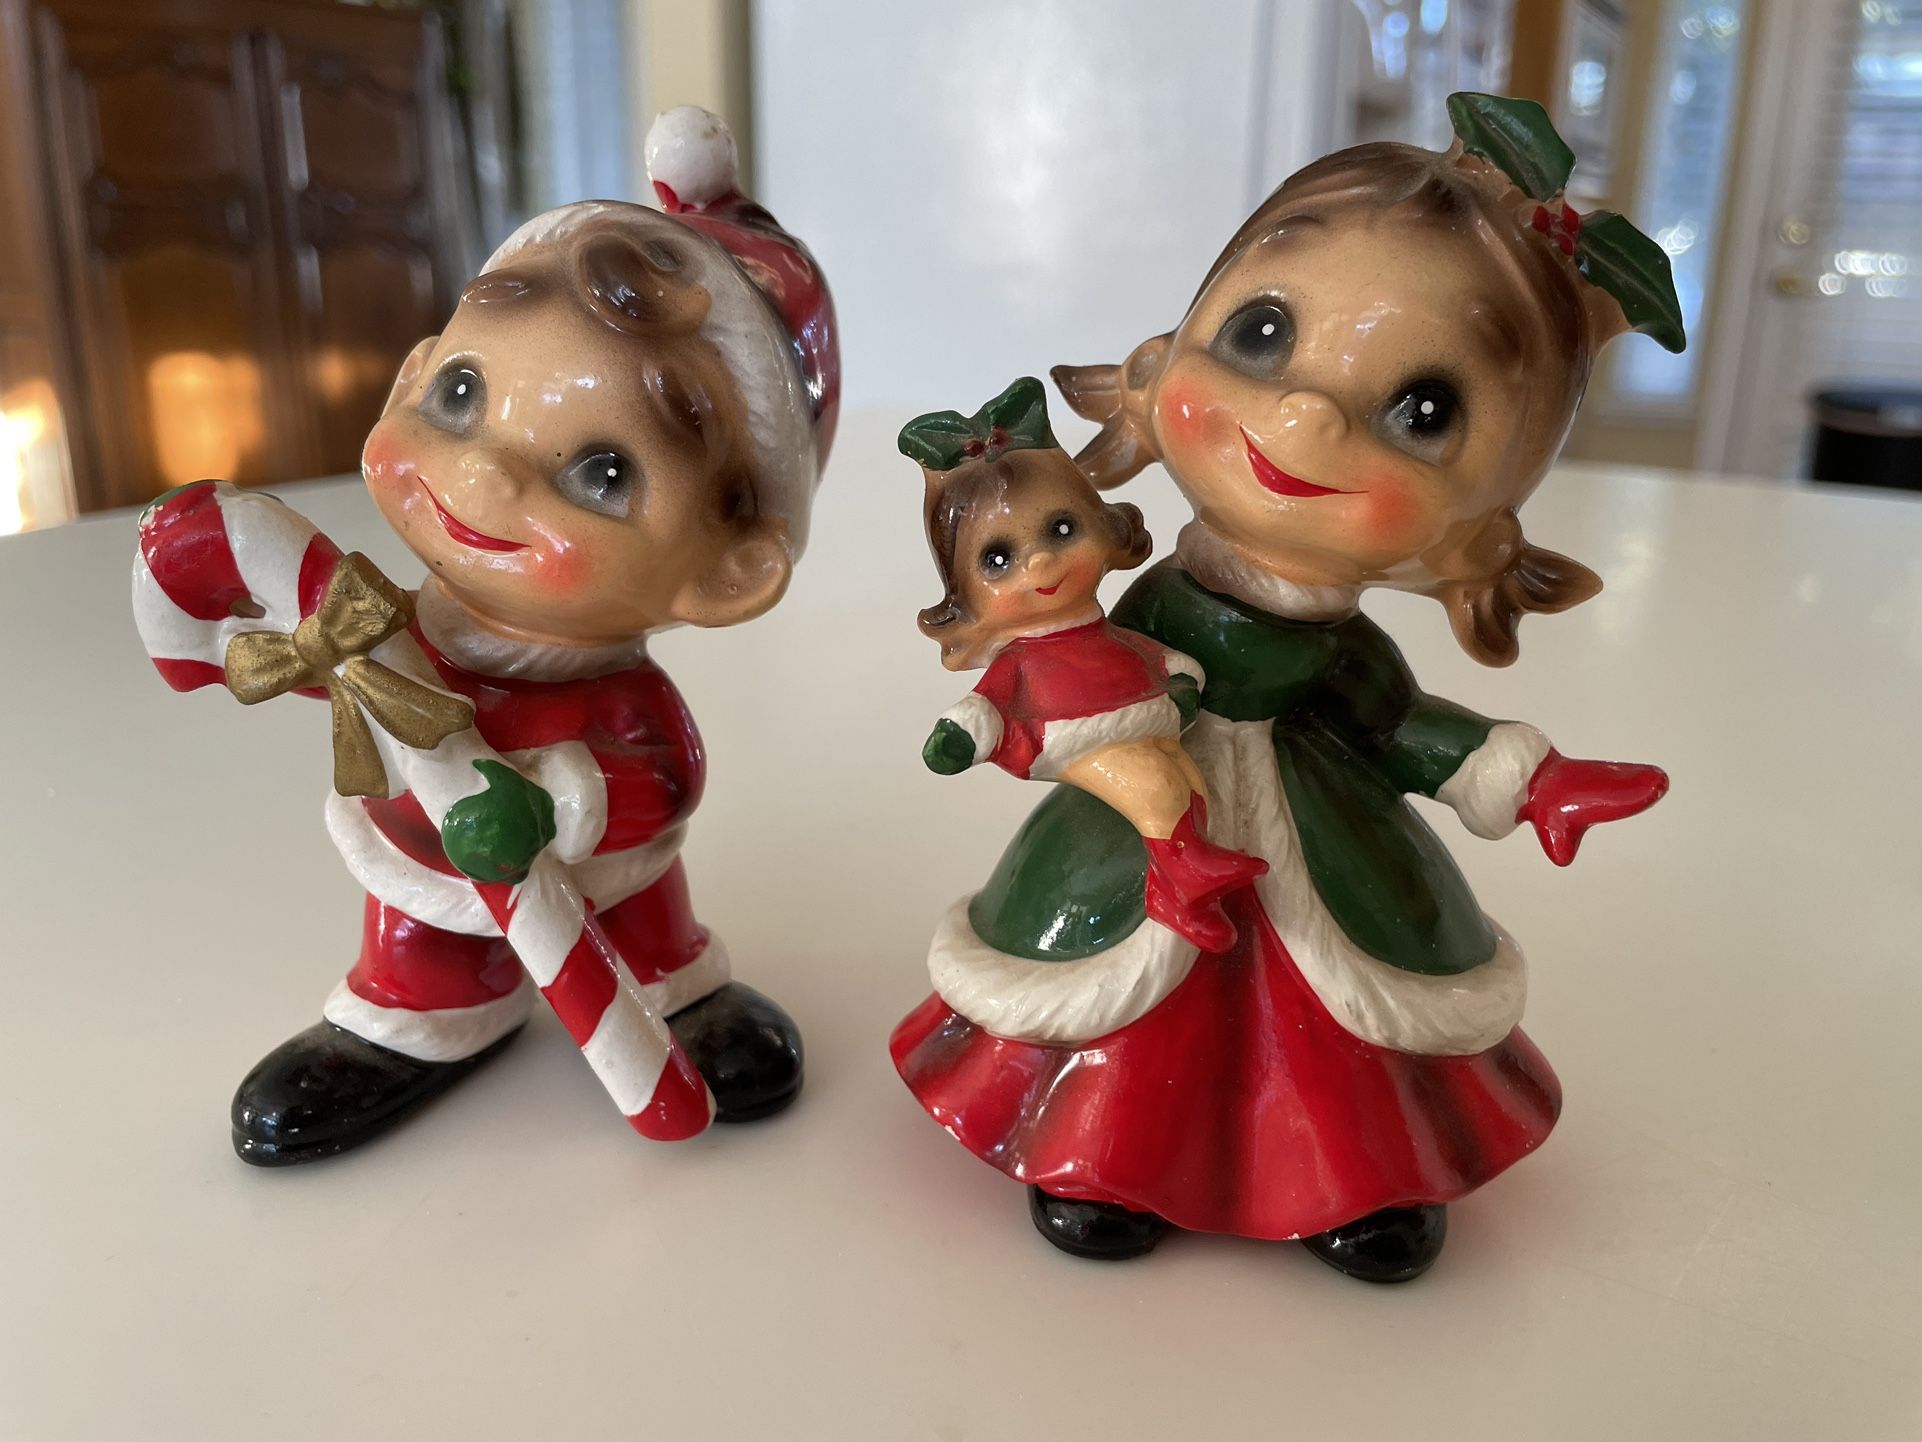 Josef Originals RARE Vintage Wee Folk Christmas Figurines Girl With Baby Doll And Boy With Candy Cane 